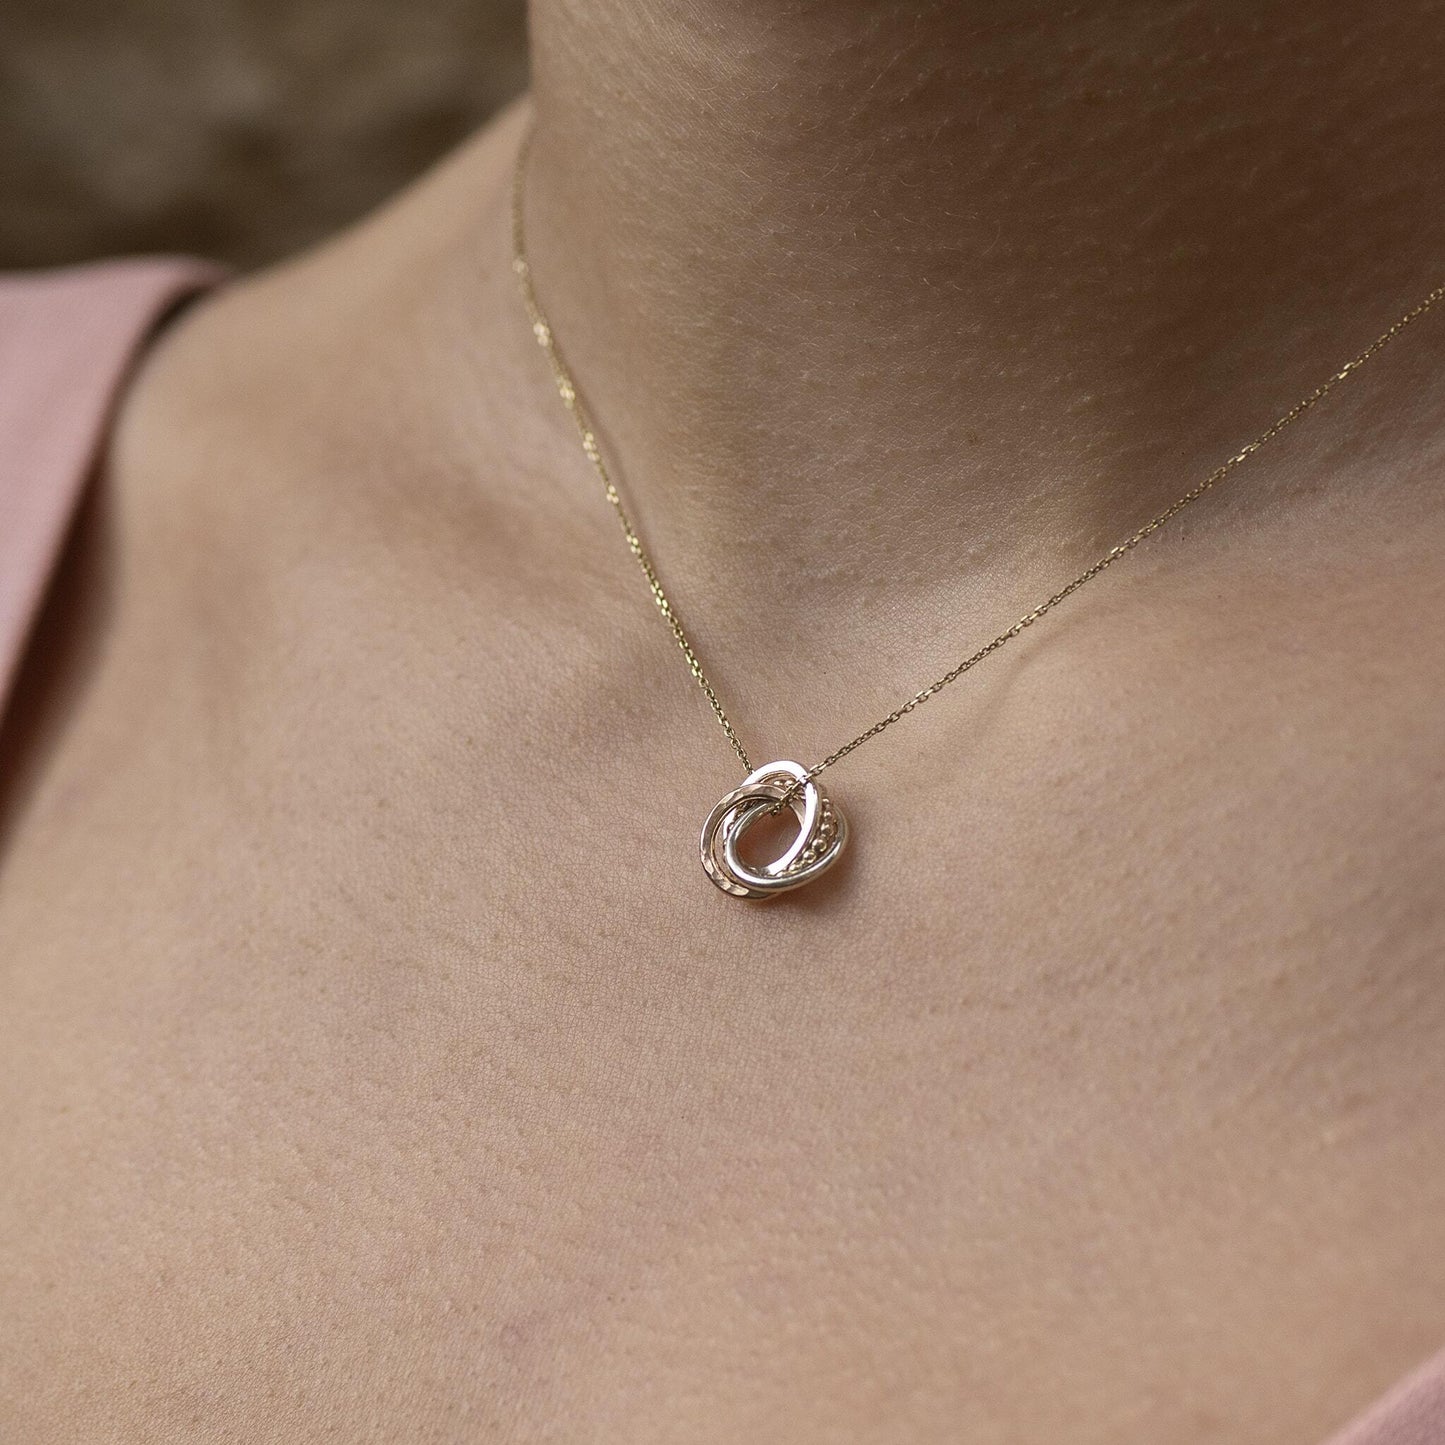 Tiny 9kt Gold Love Knot Necklace - 4 Links for 4 Loved Ones - Recycled White Gold - Yellow Gold